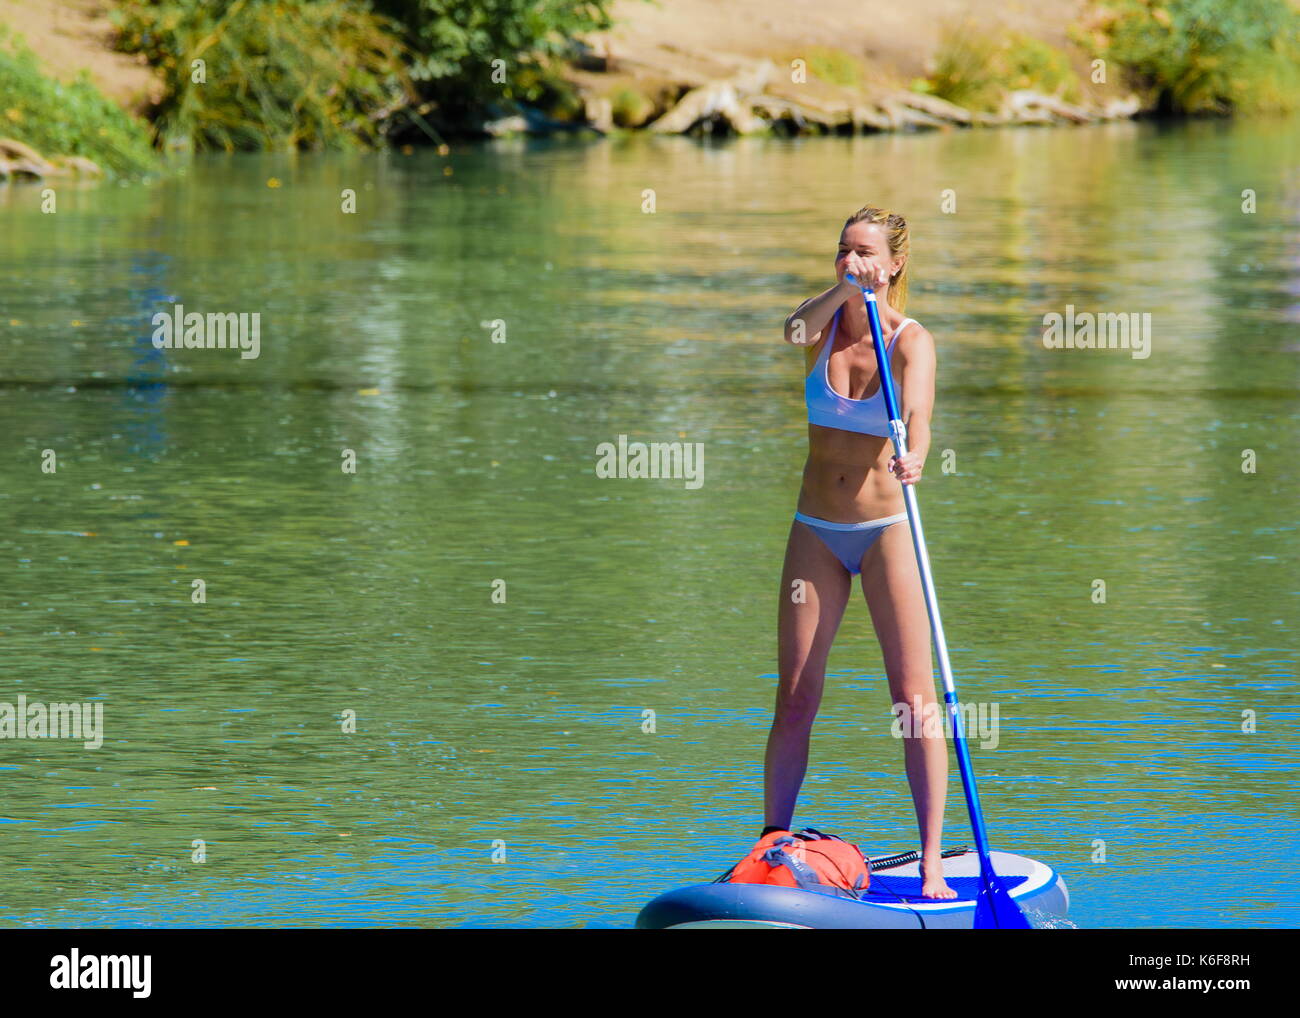 Aranjuez, Madrid, Spain. 10st September, 2017. A woman practicing paddle surf by the Tagus river in Aranjuez, Spain. Stock Photo